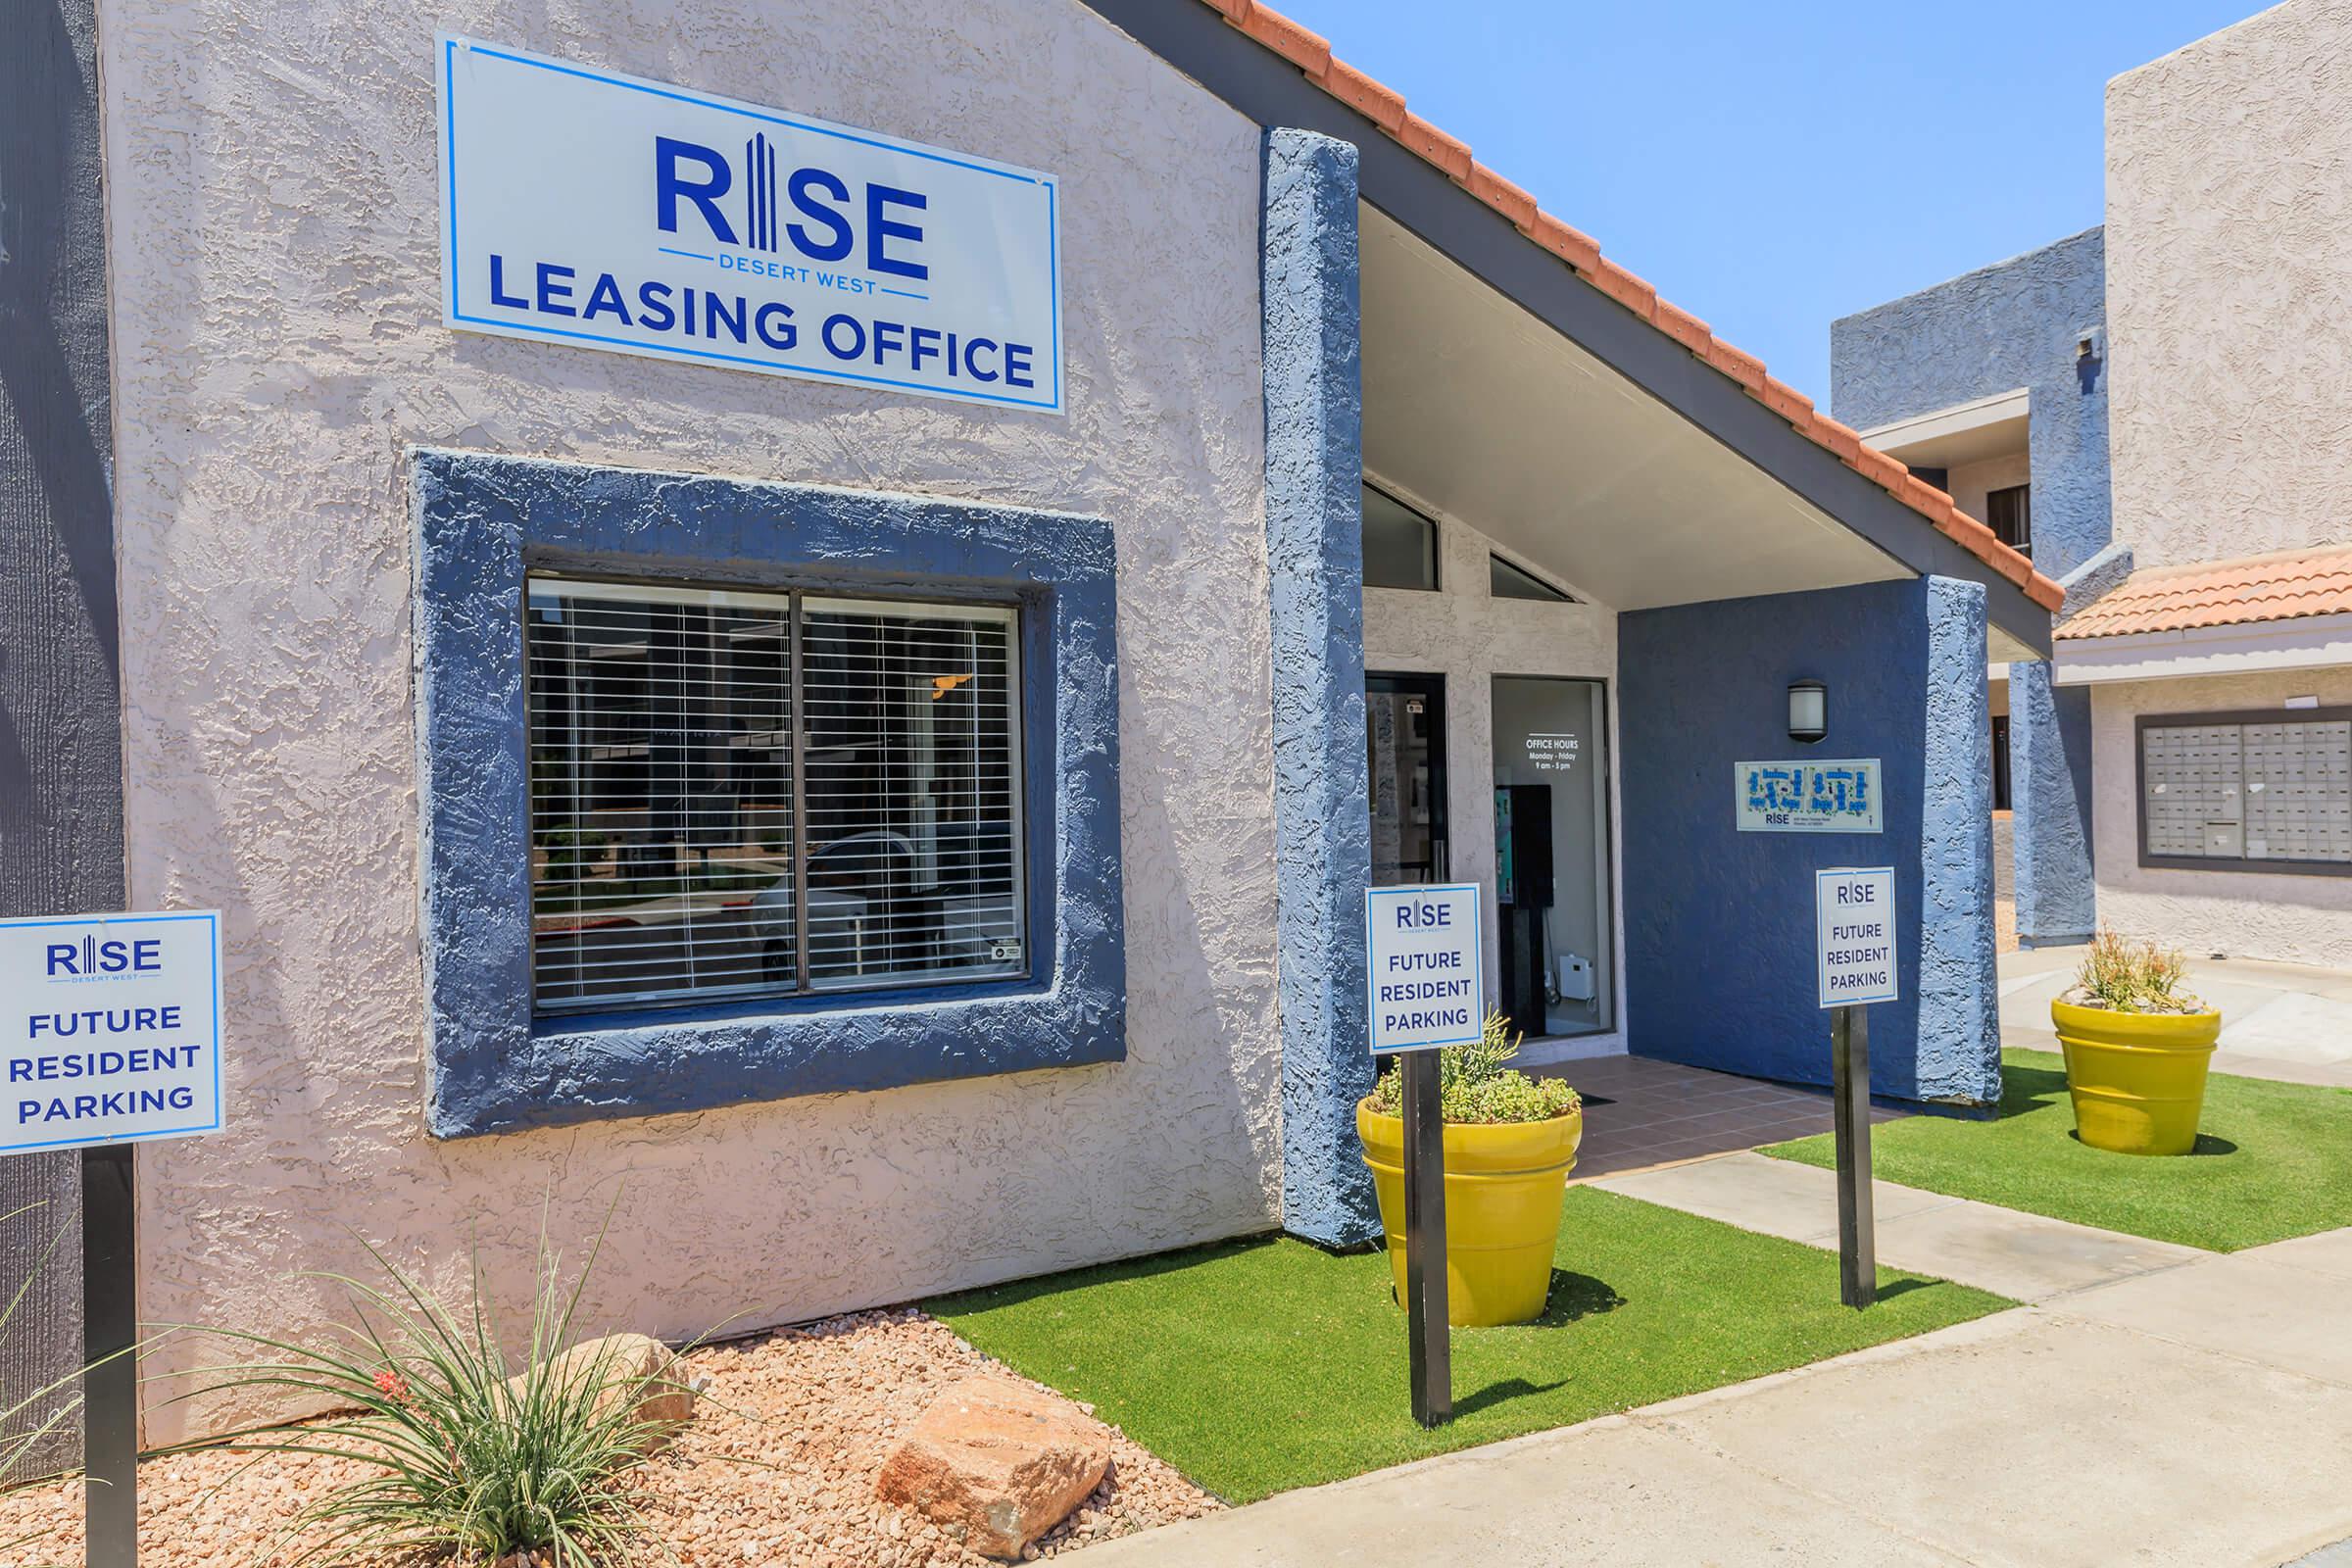 Outside the Rise Desert West Phoenix apartments front leasing office